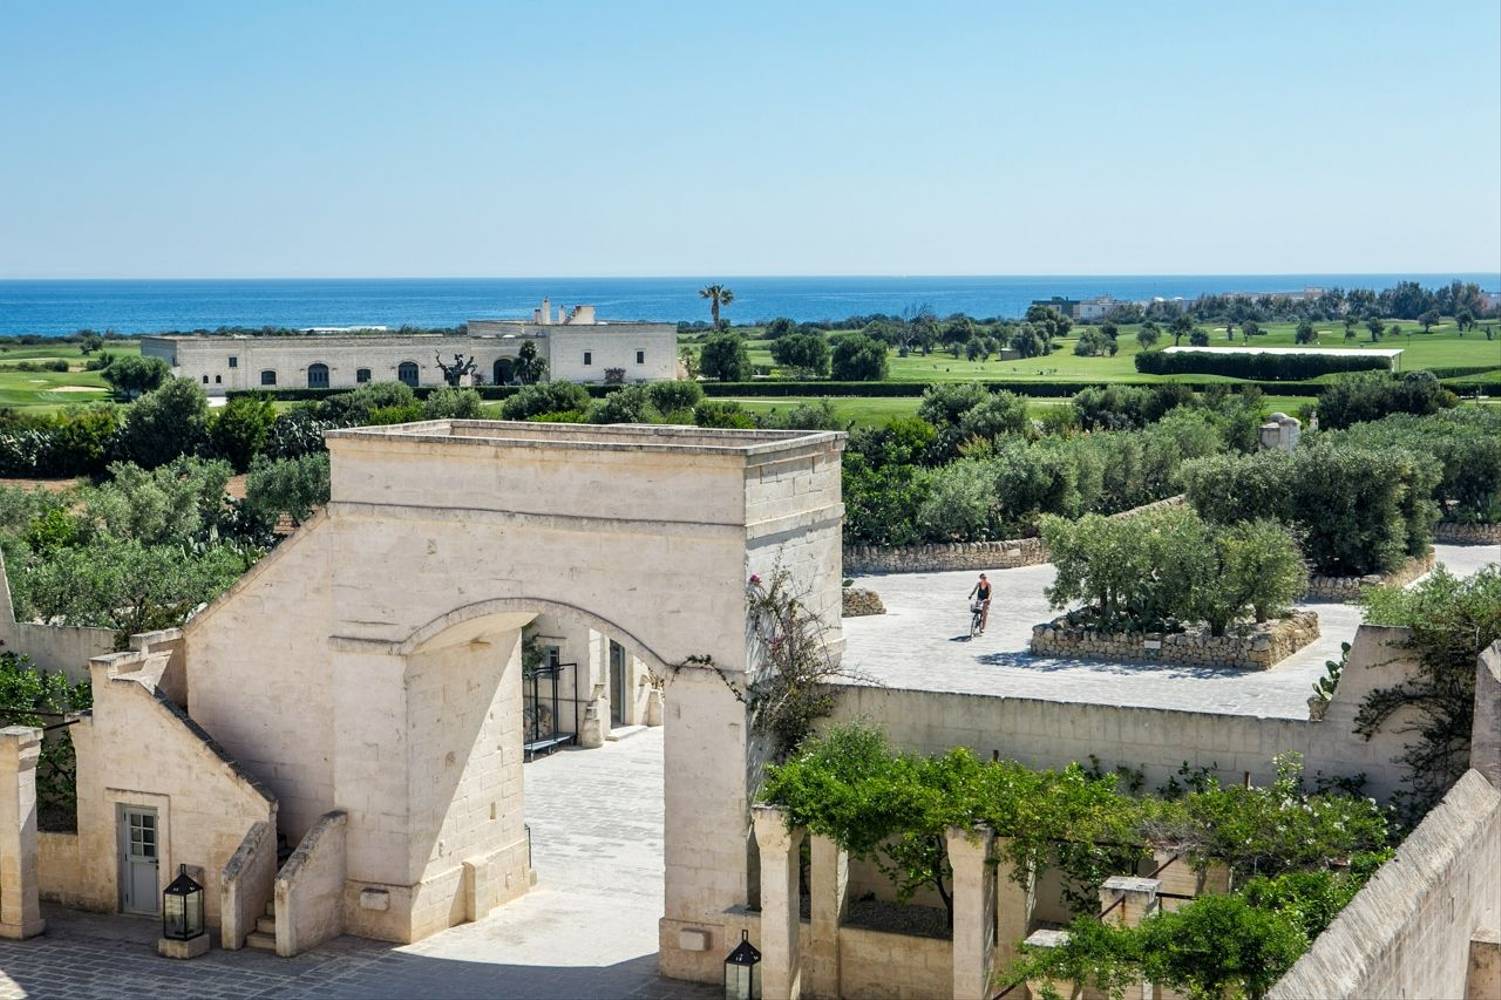 Cycling at Borgo Egnazia in Italy